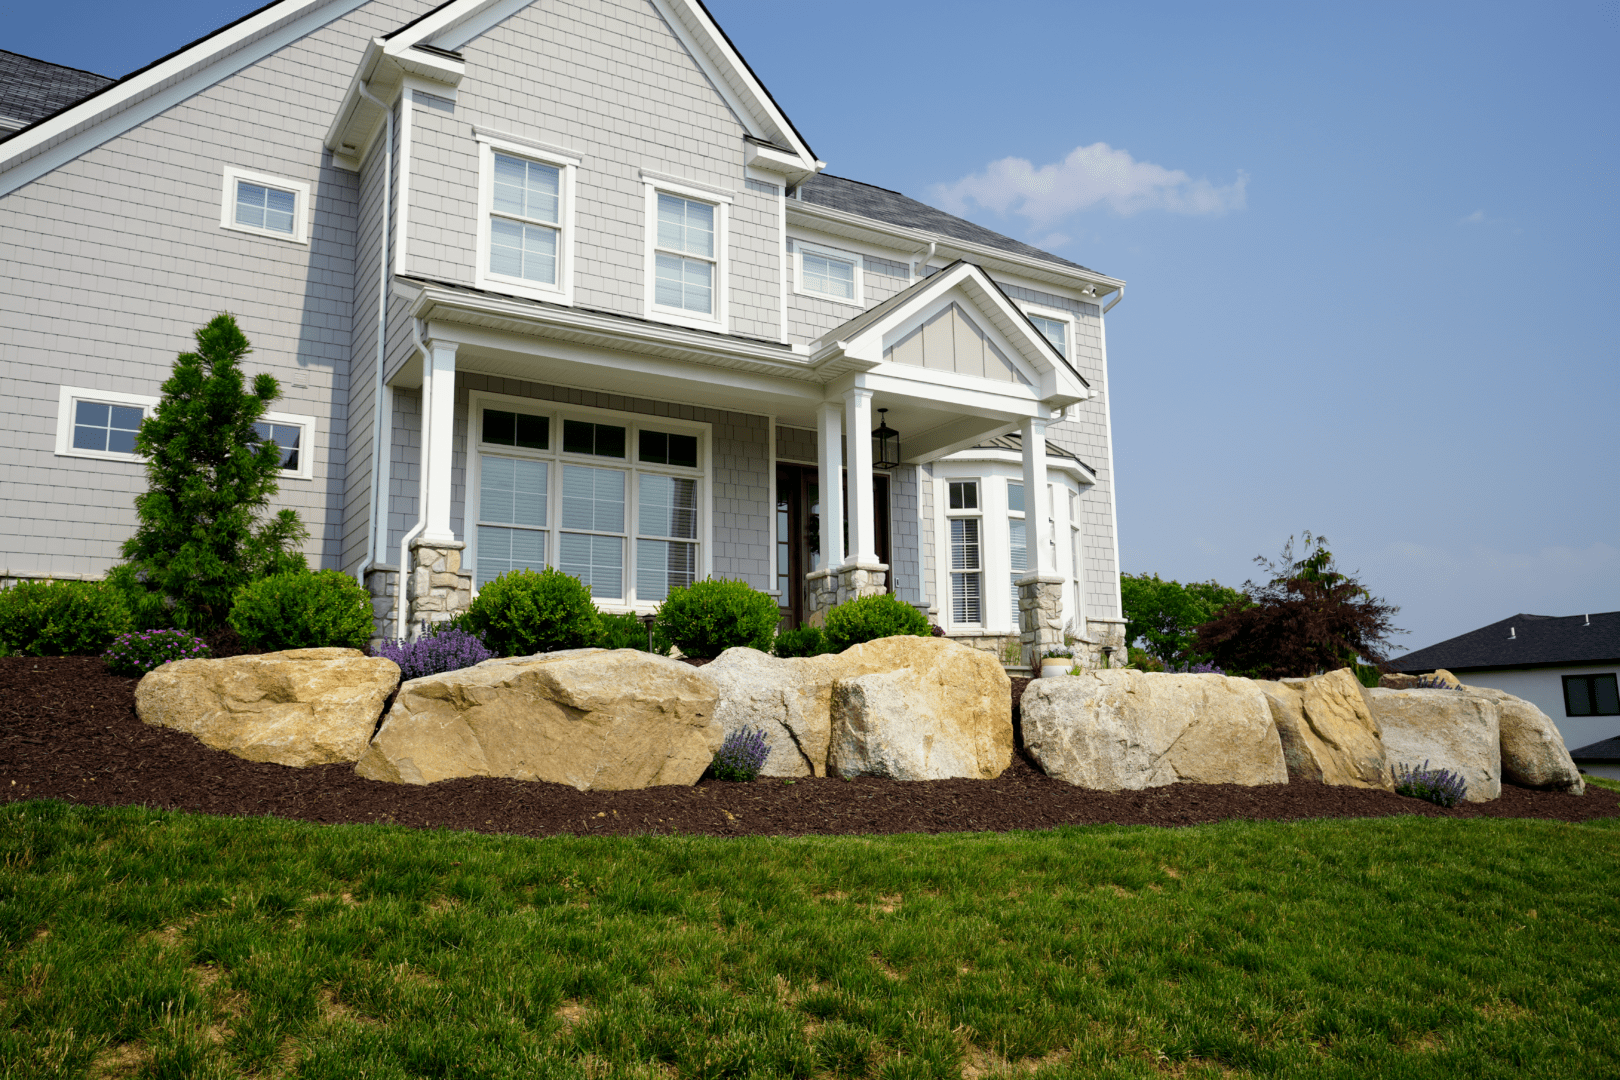 A boulder in front of a house.